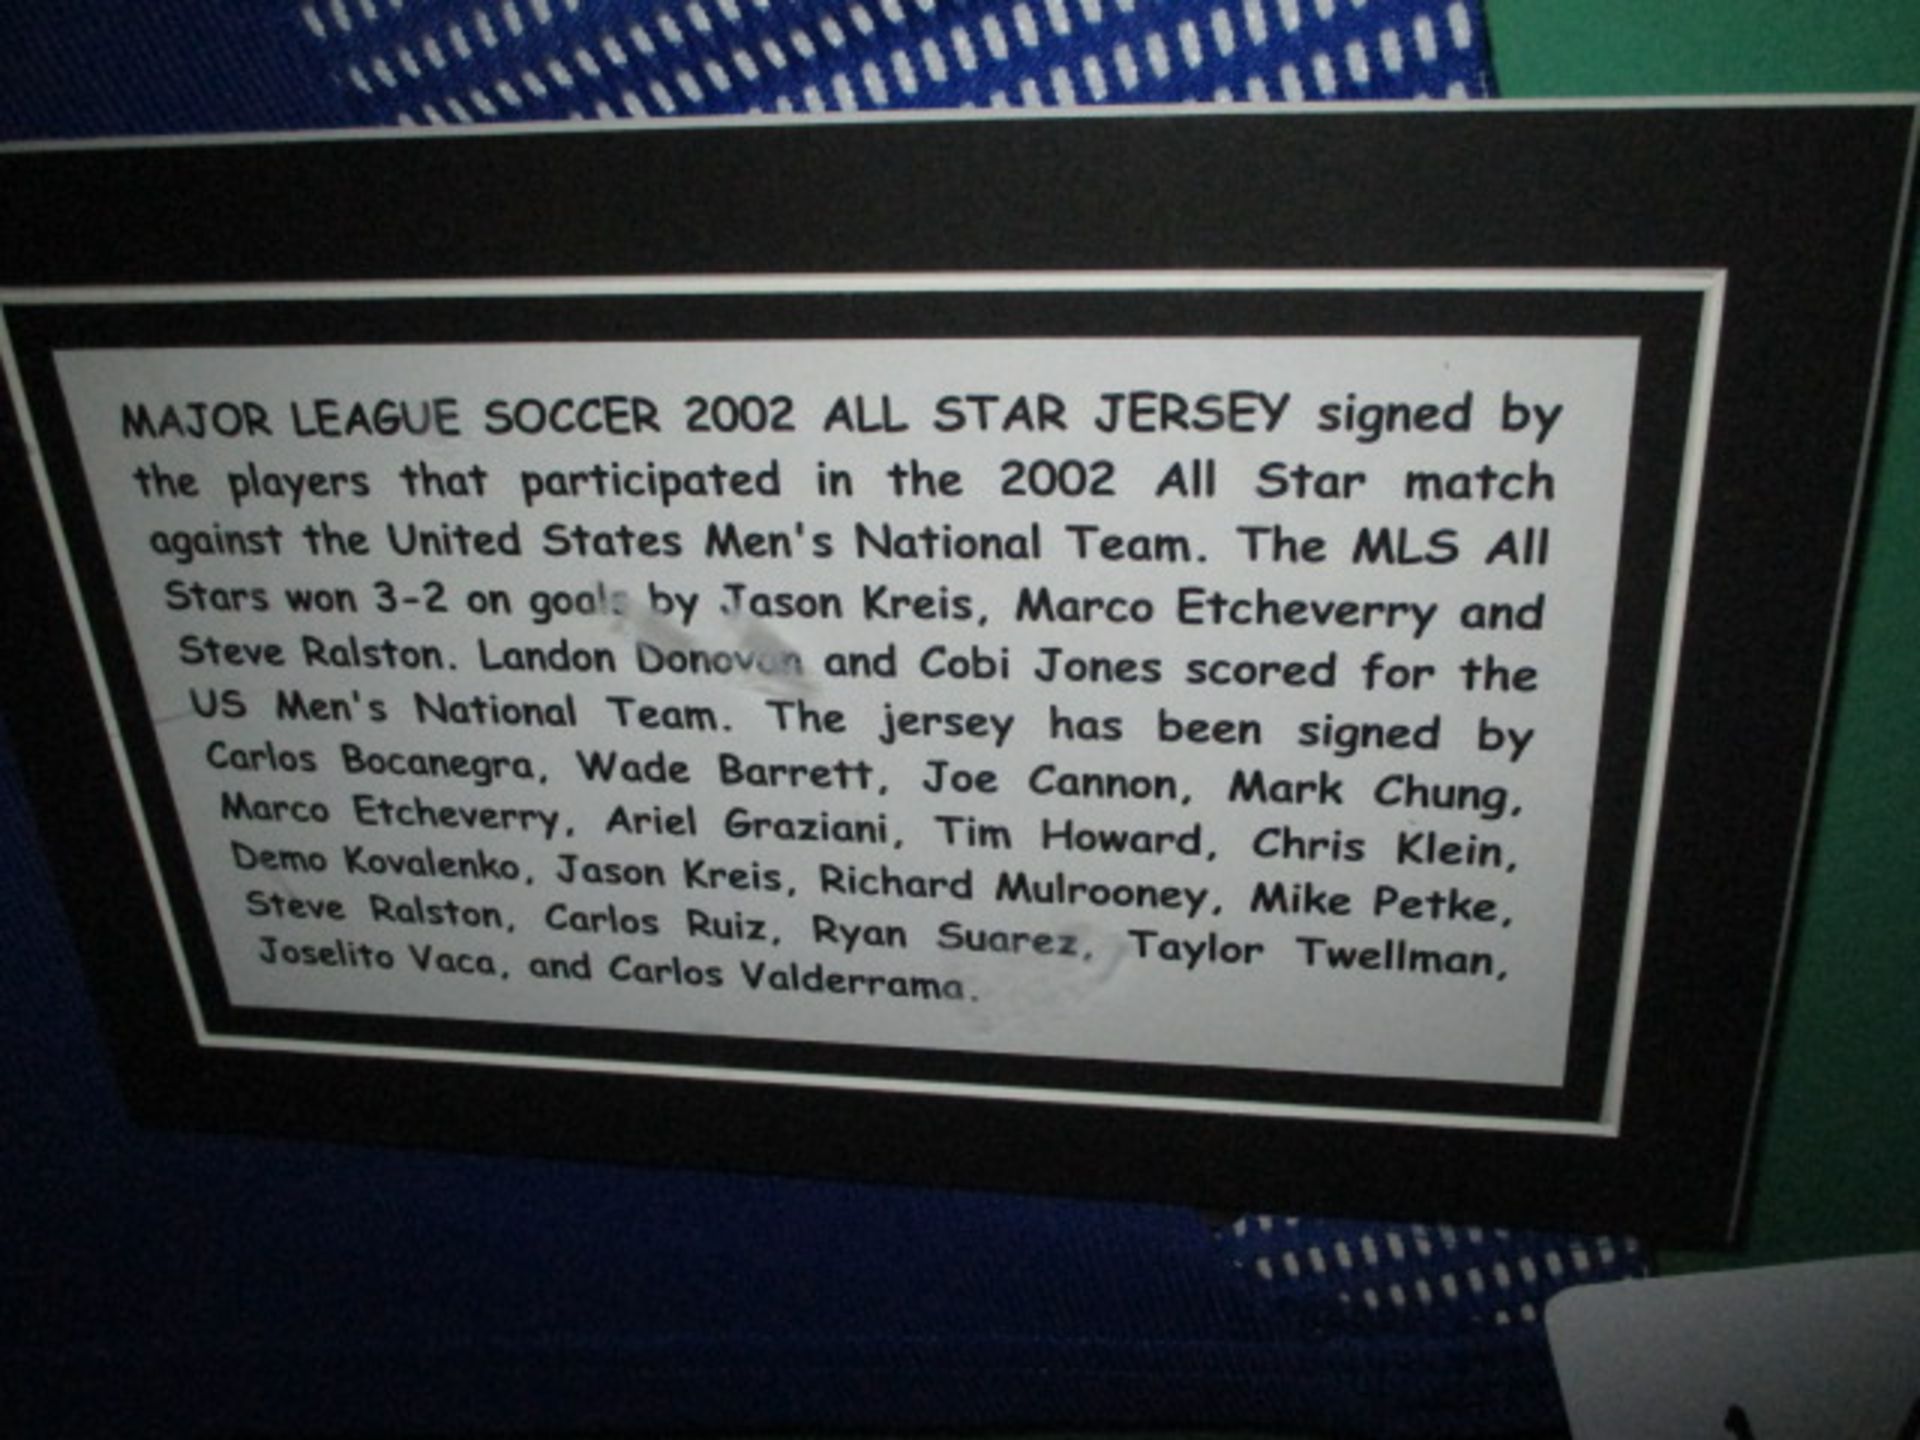 Major League 2002 soccer All-Stare jersey signed by player, 38in w x 33in hgt - Image 2 of 2